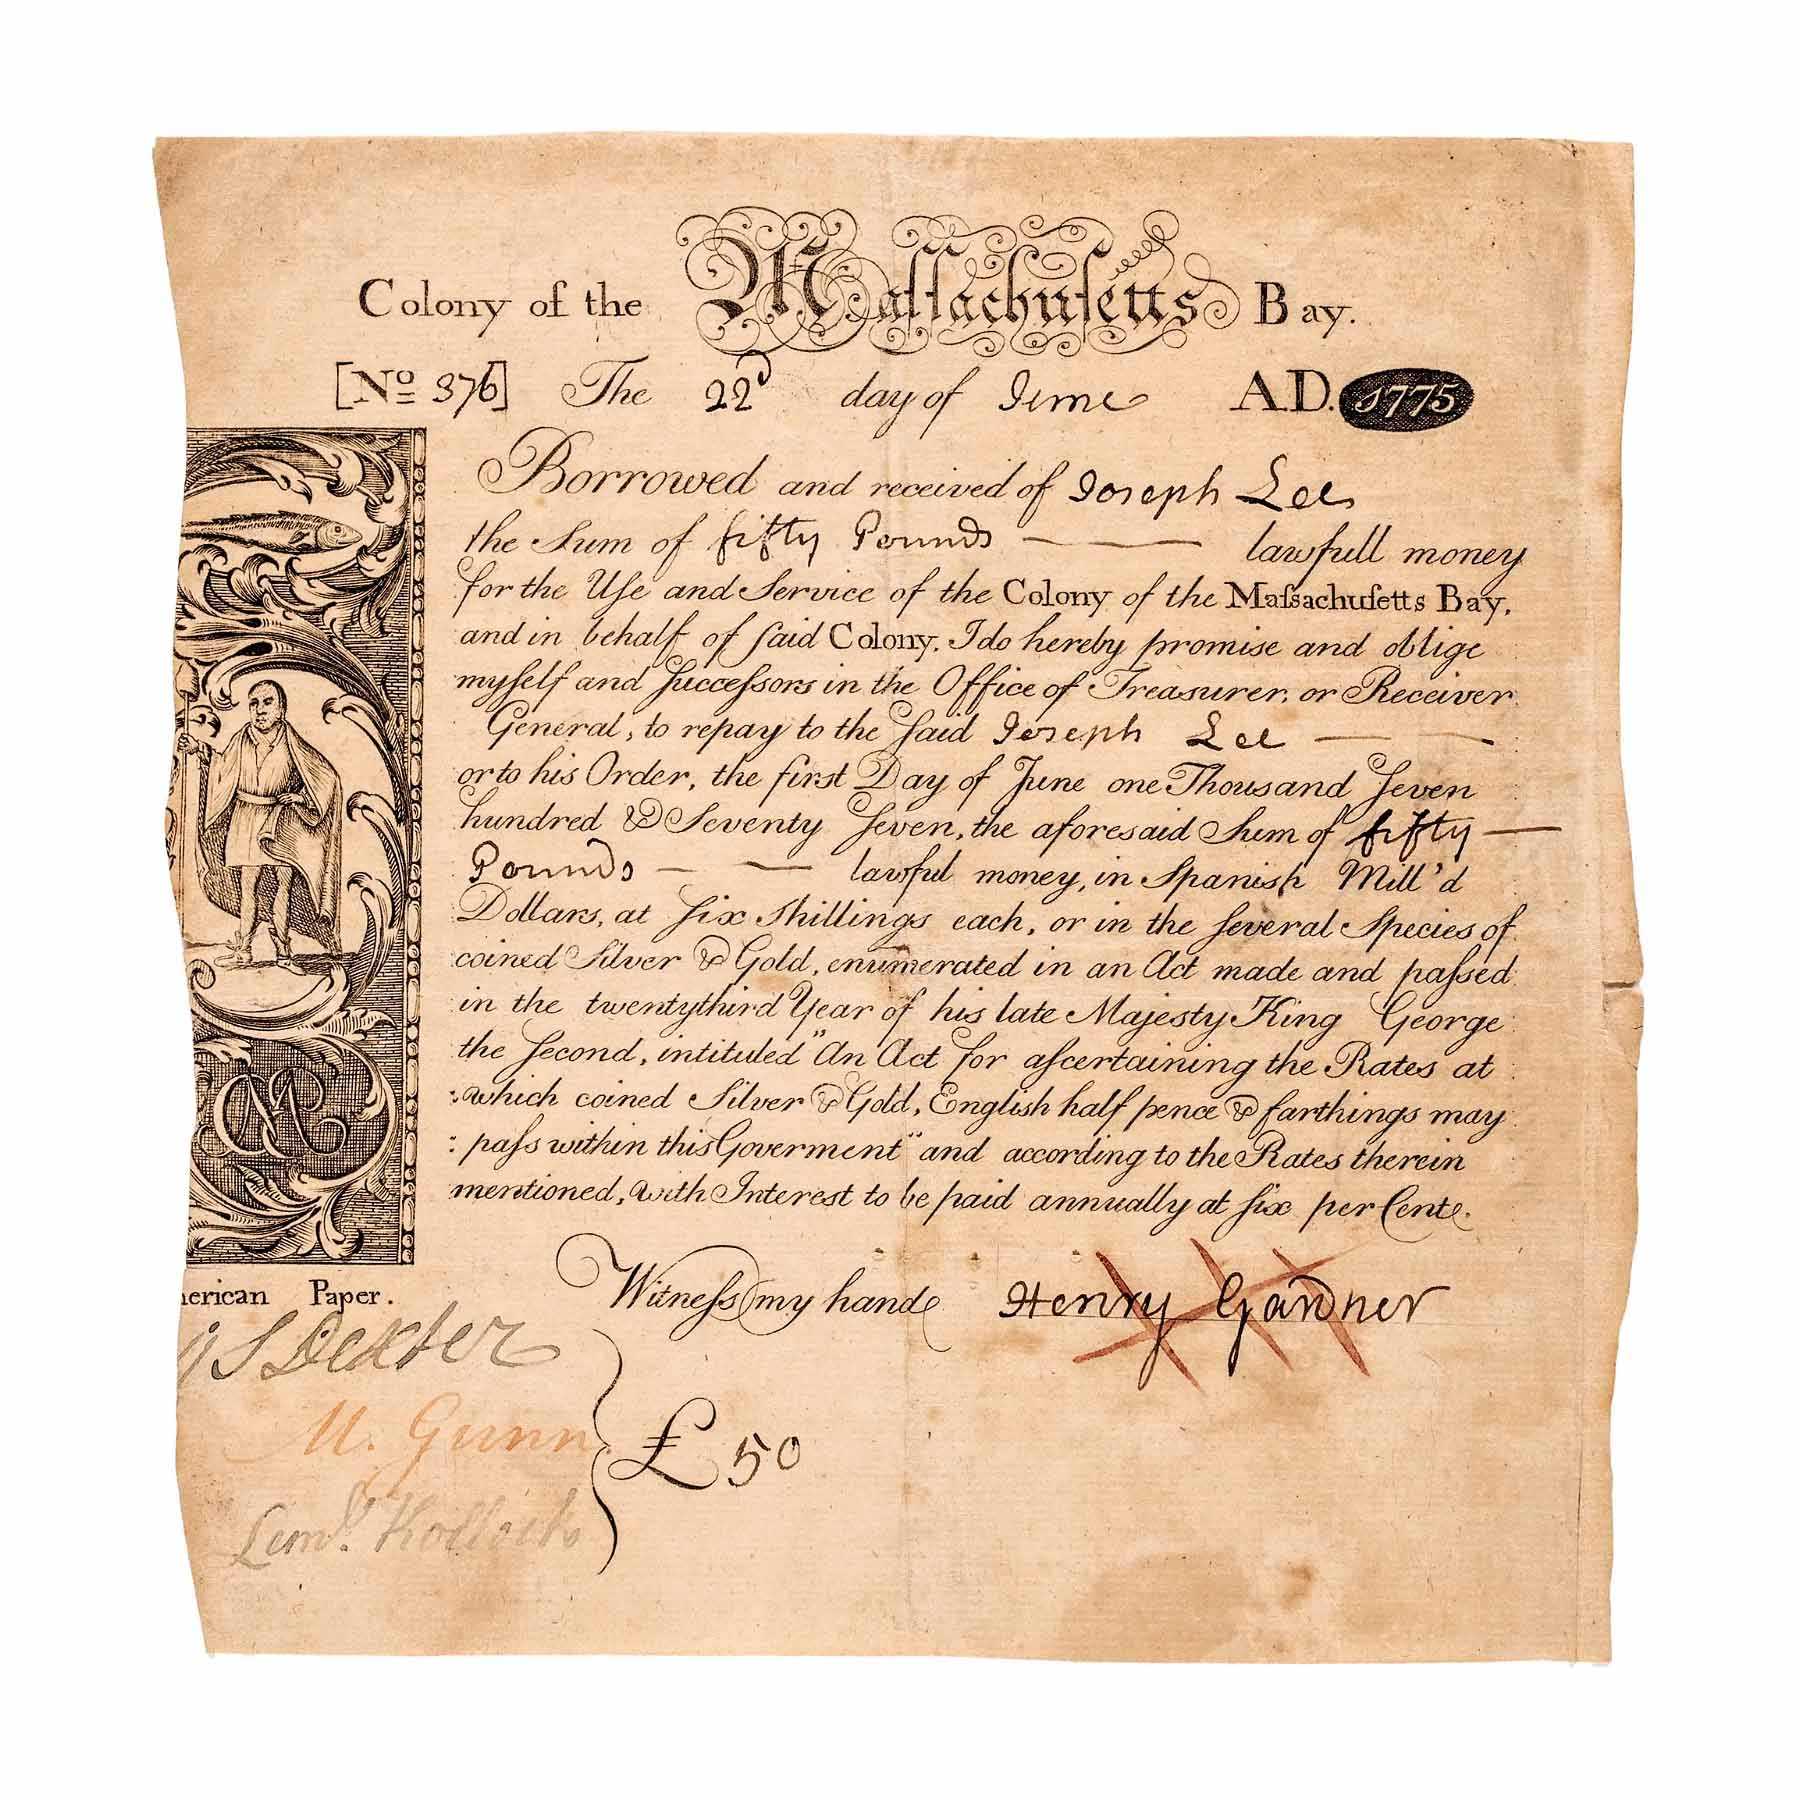 Colonial Boston engraving and Paul Revere war bond lead Early American&#8217;s June 8 sale